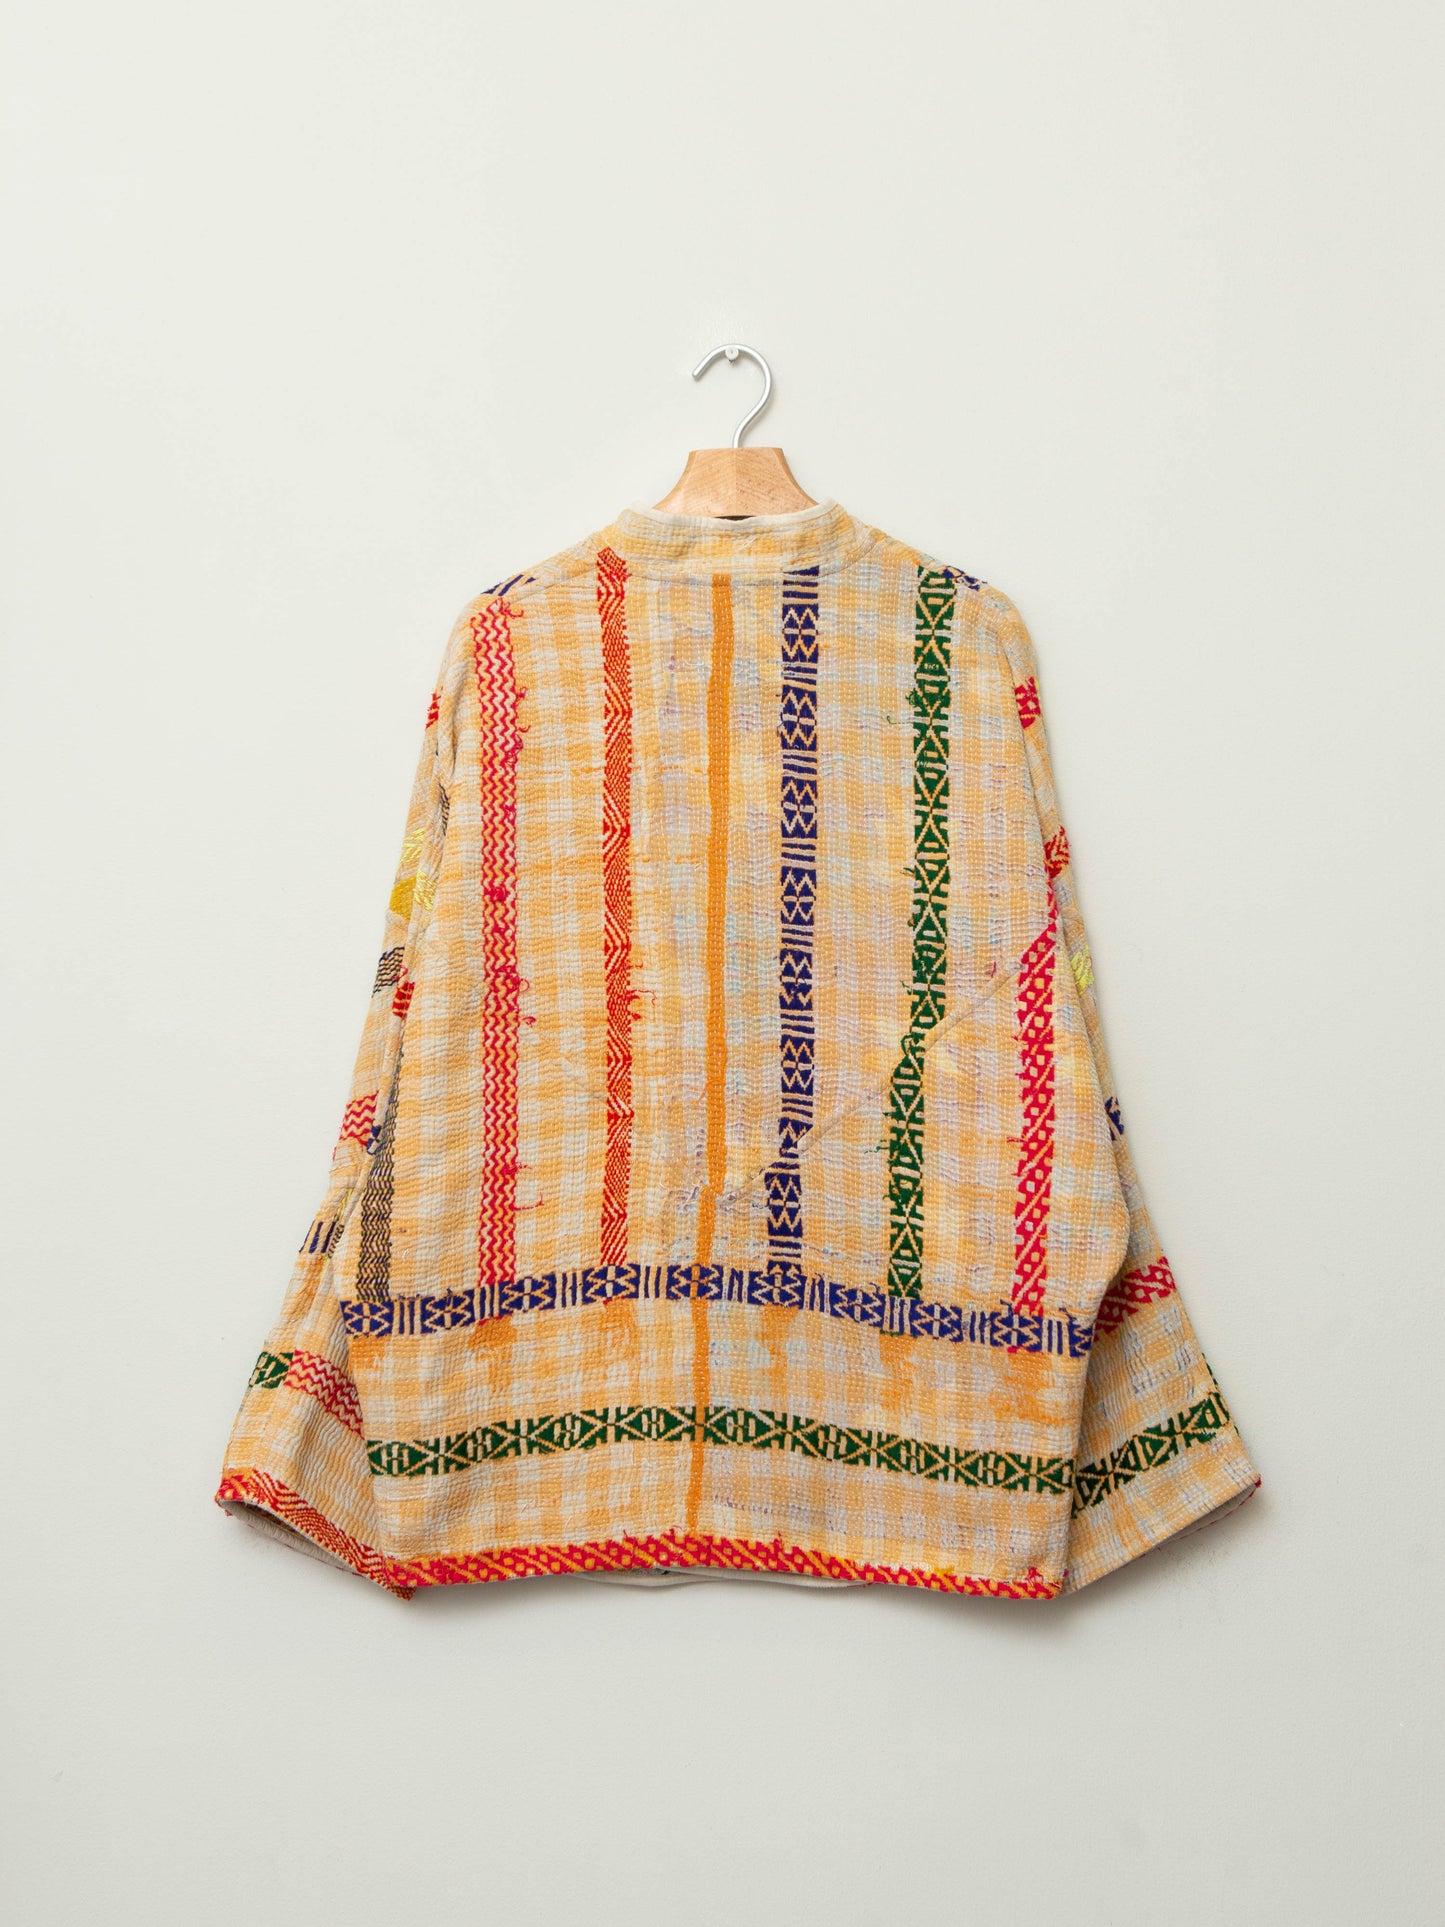 The Ishani Patchwork Quilted Kantha Jacket